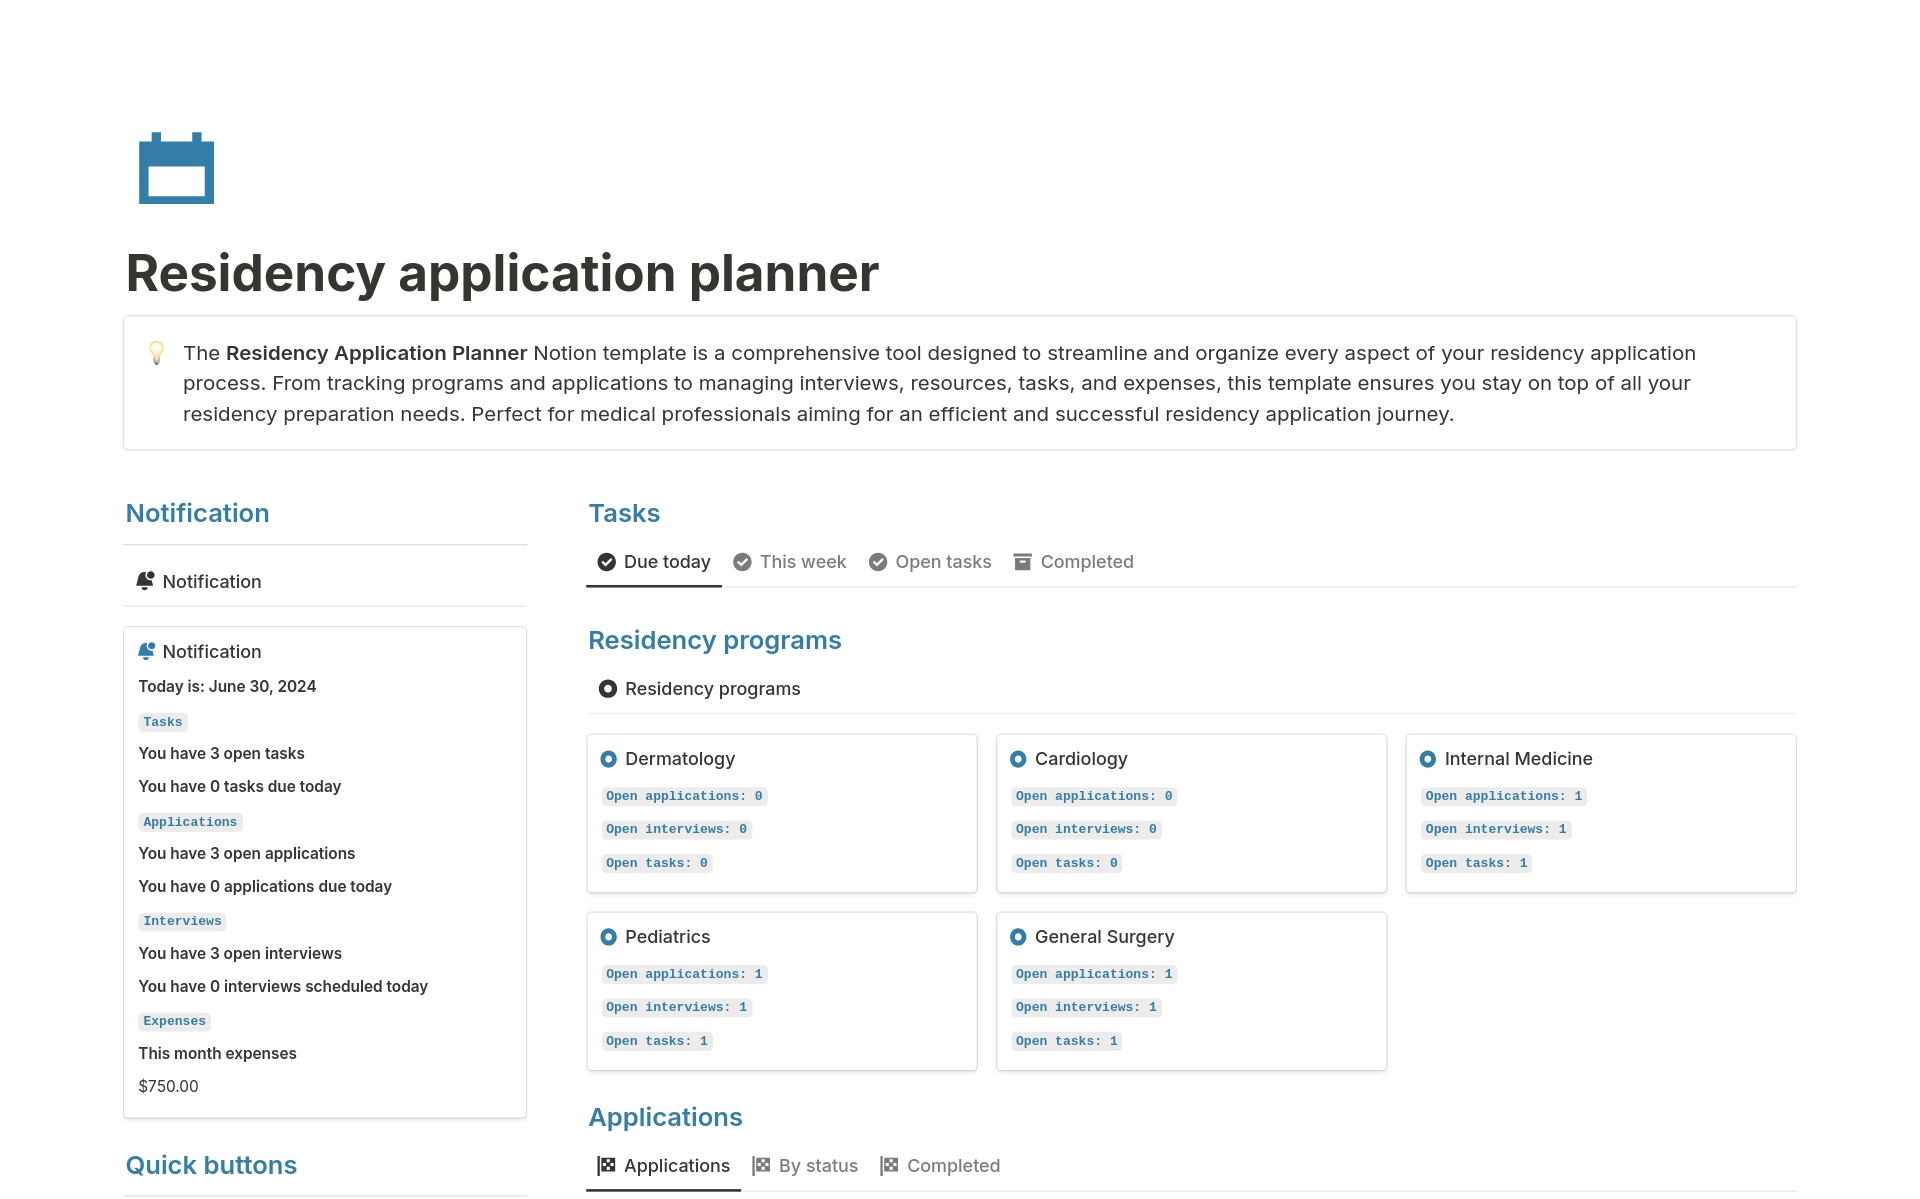 The Residency Application Planner Notion template is a comprehensive tool designed to streamline and organize every aspect of your residency application process. 